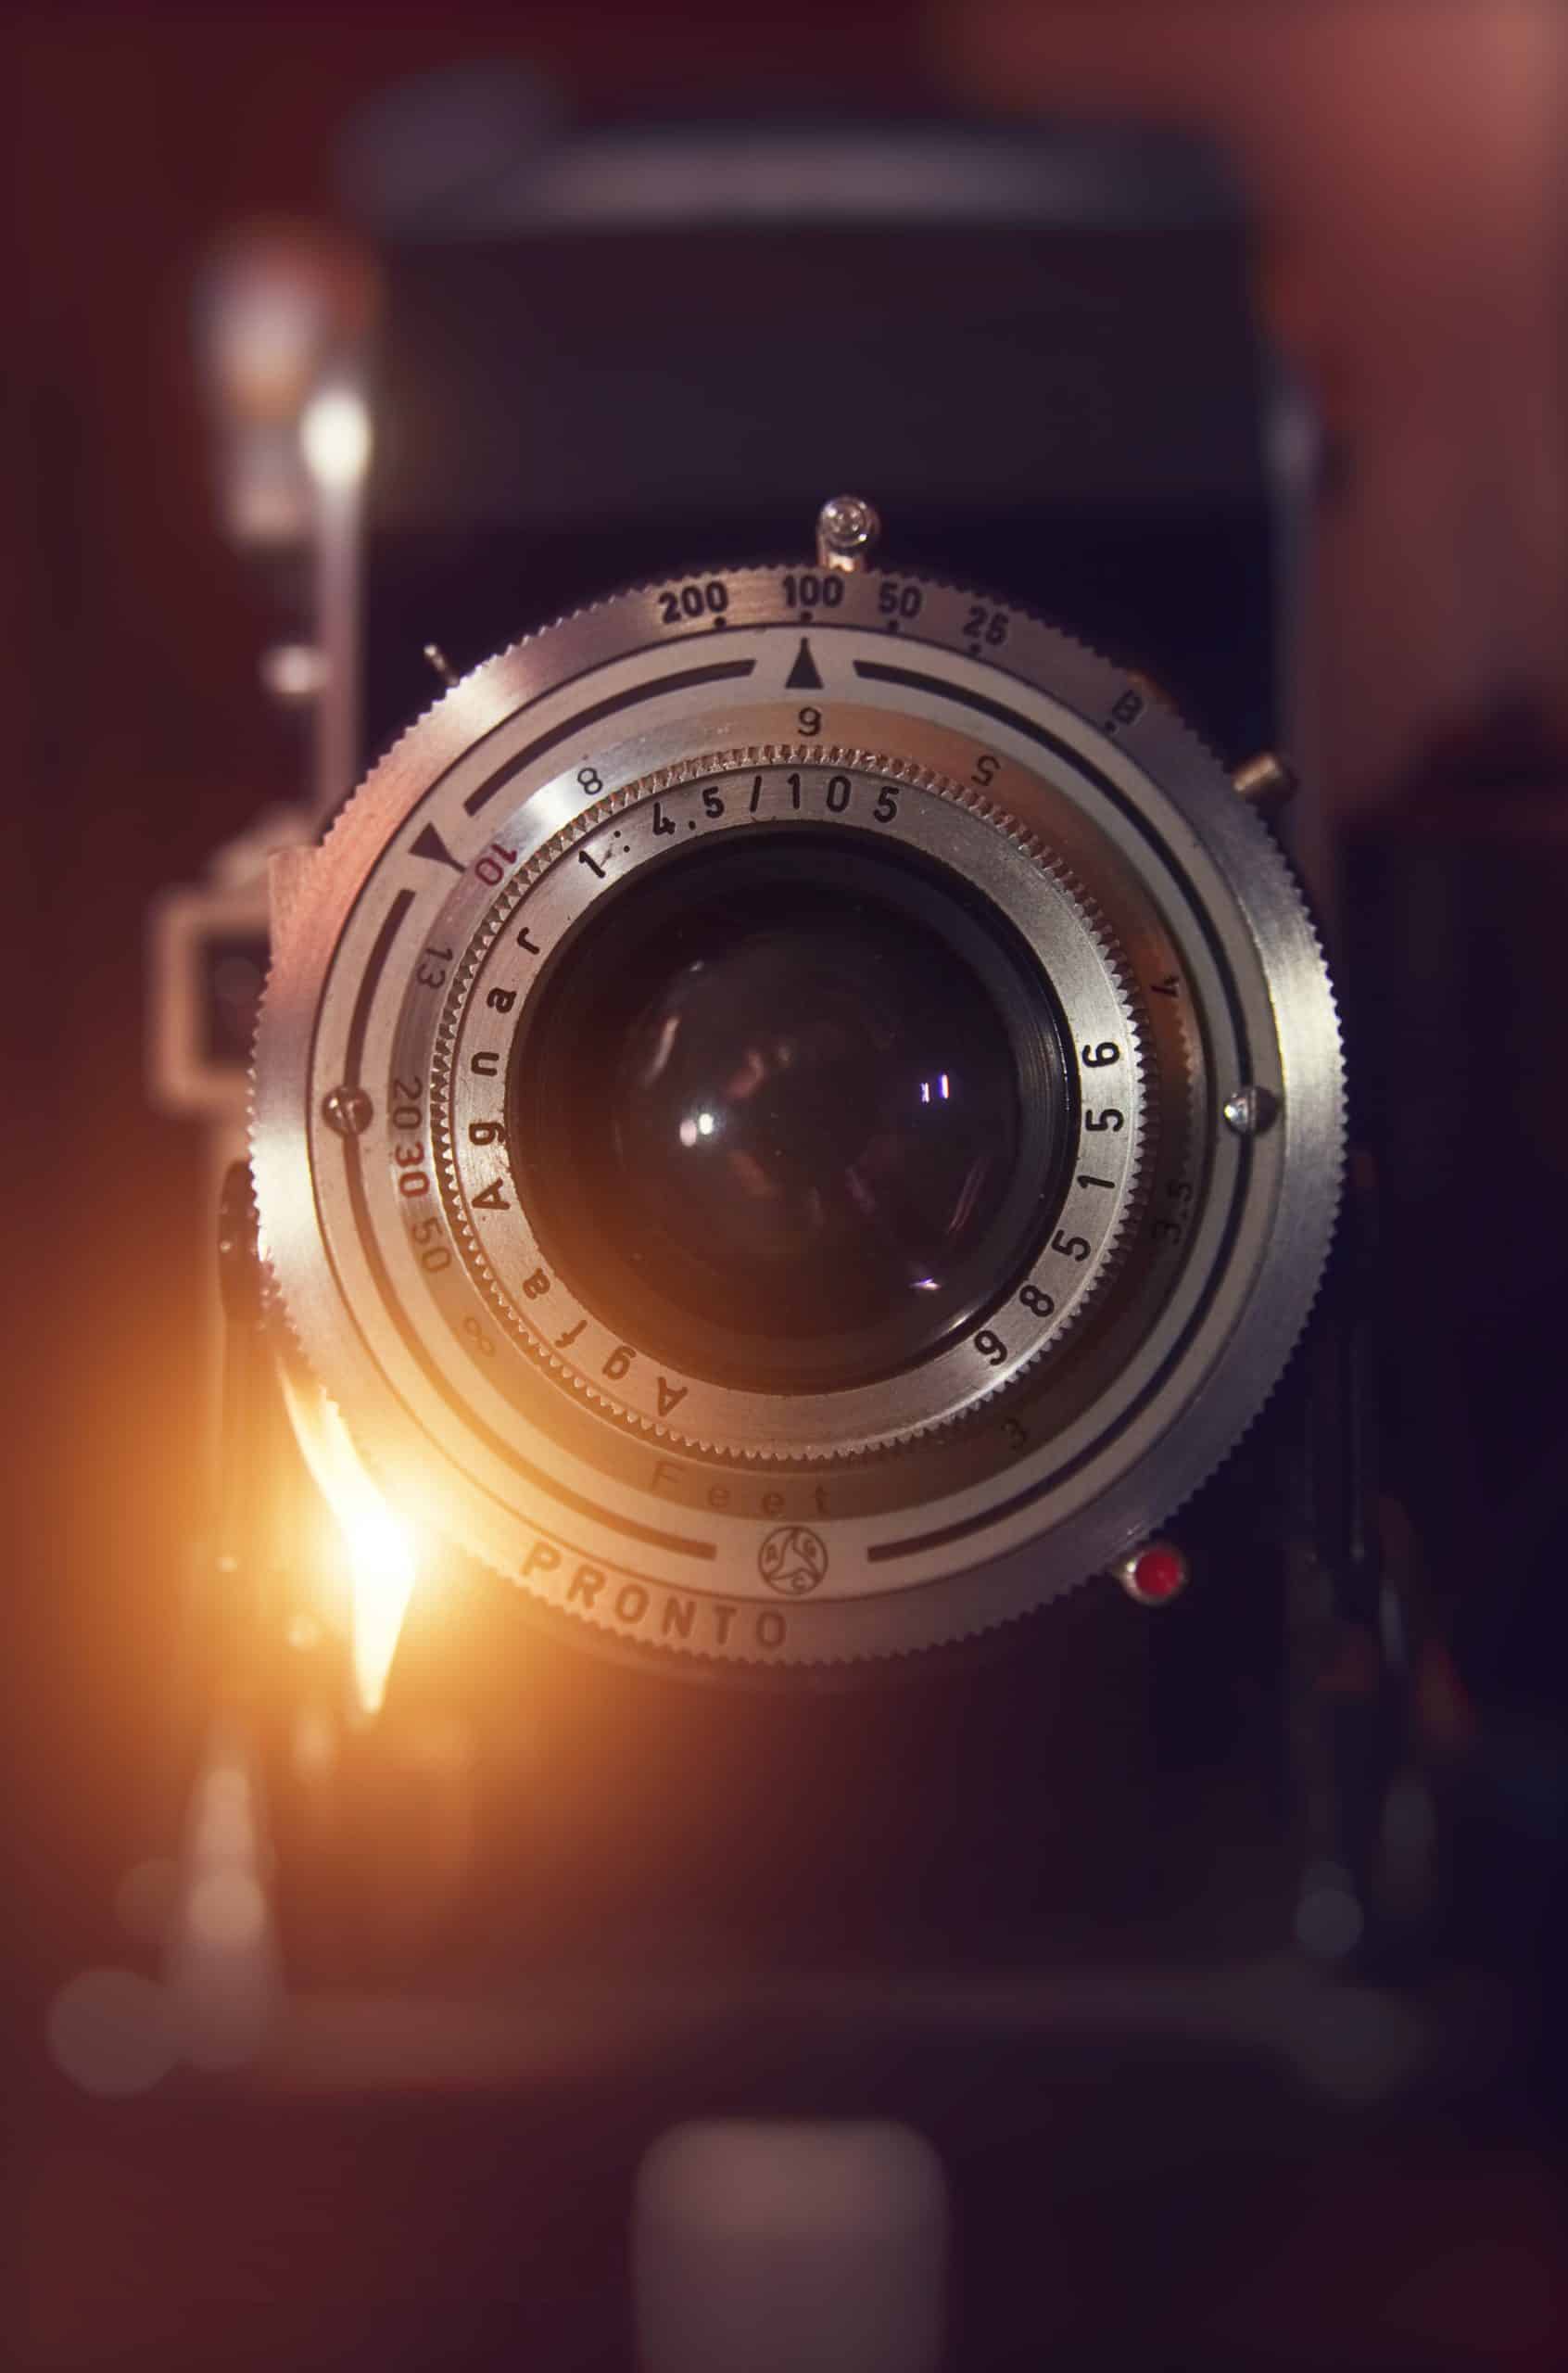 Tips for cleaning your camera lens